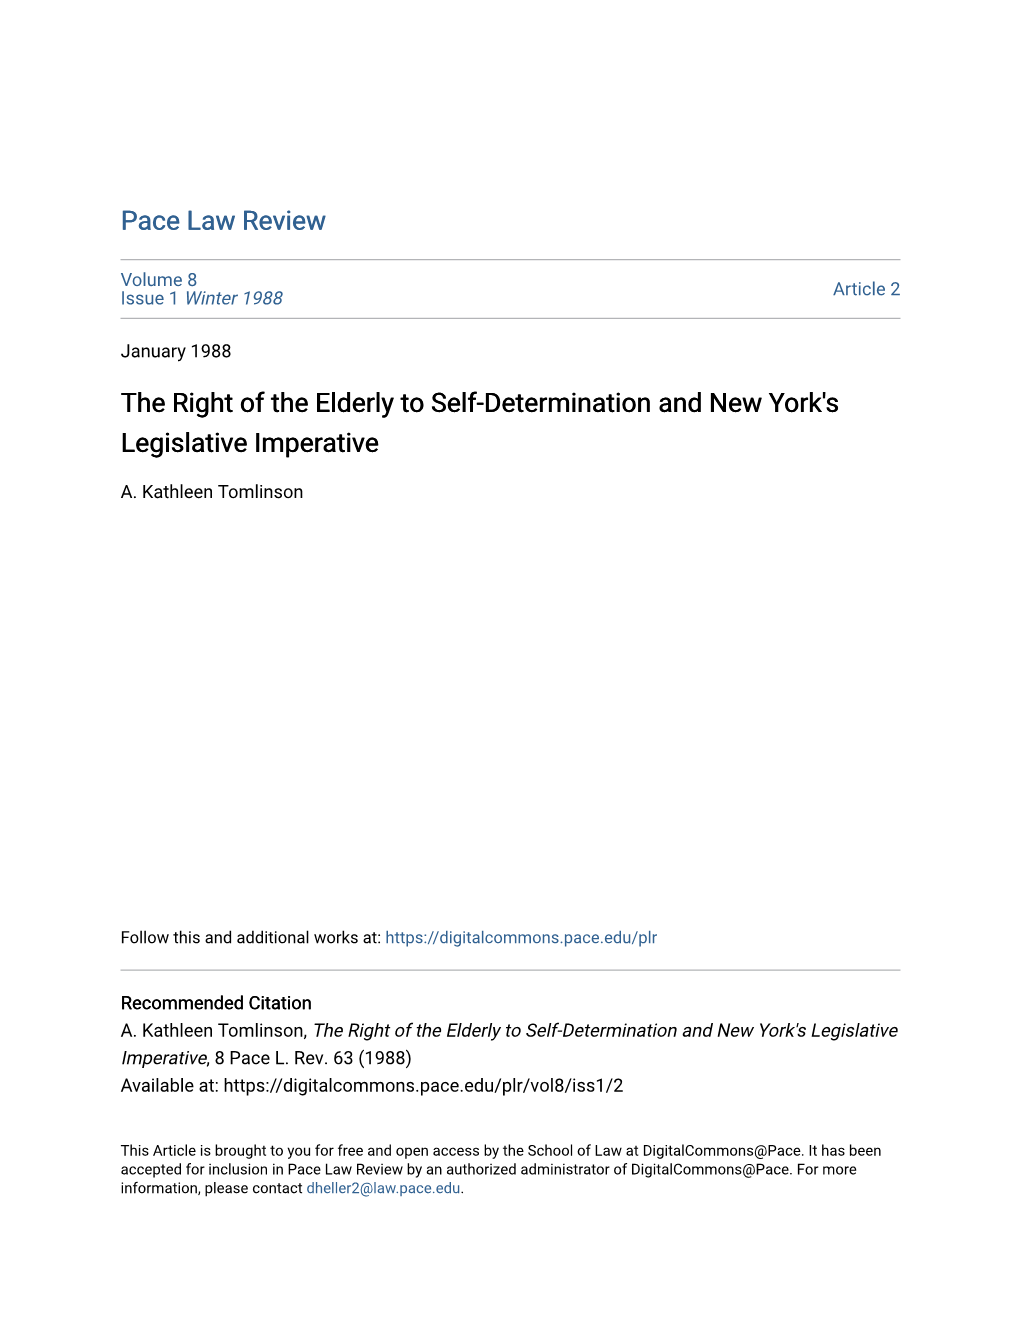 The Right of the Elderly to Self-Determination and New York's Legislative Imperative